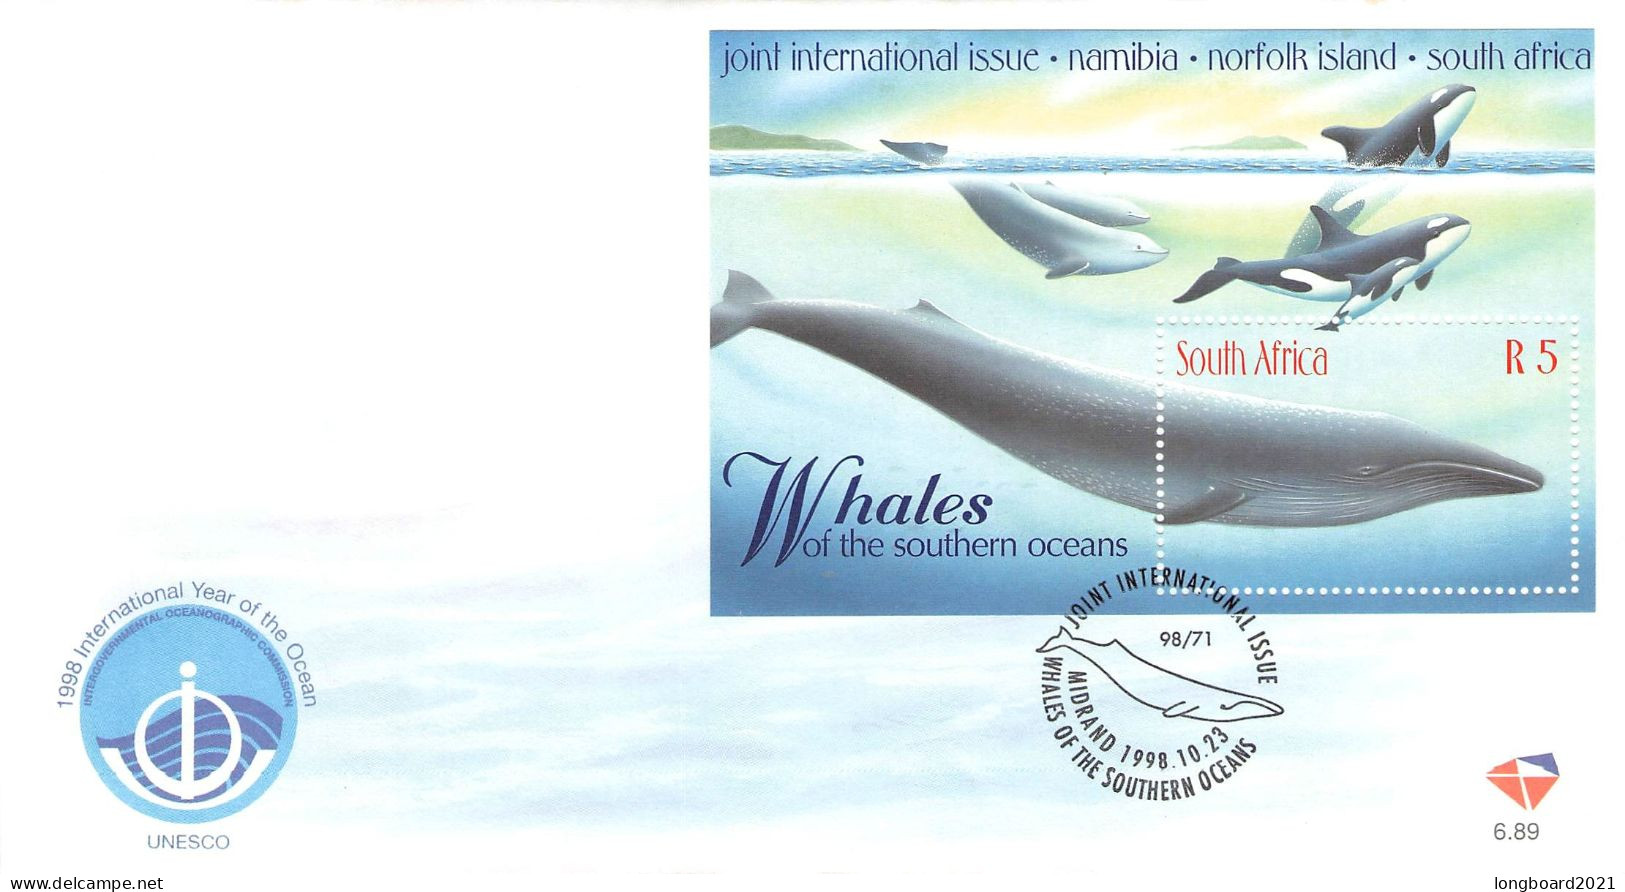 SOUTH AFRICA - FDC 1998 WWF - WHALE / 4138 - FDC